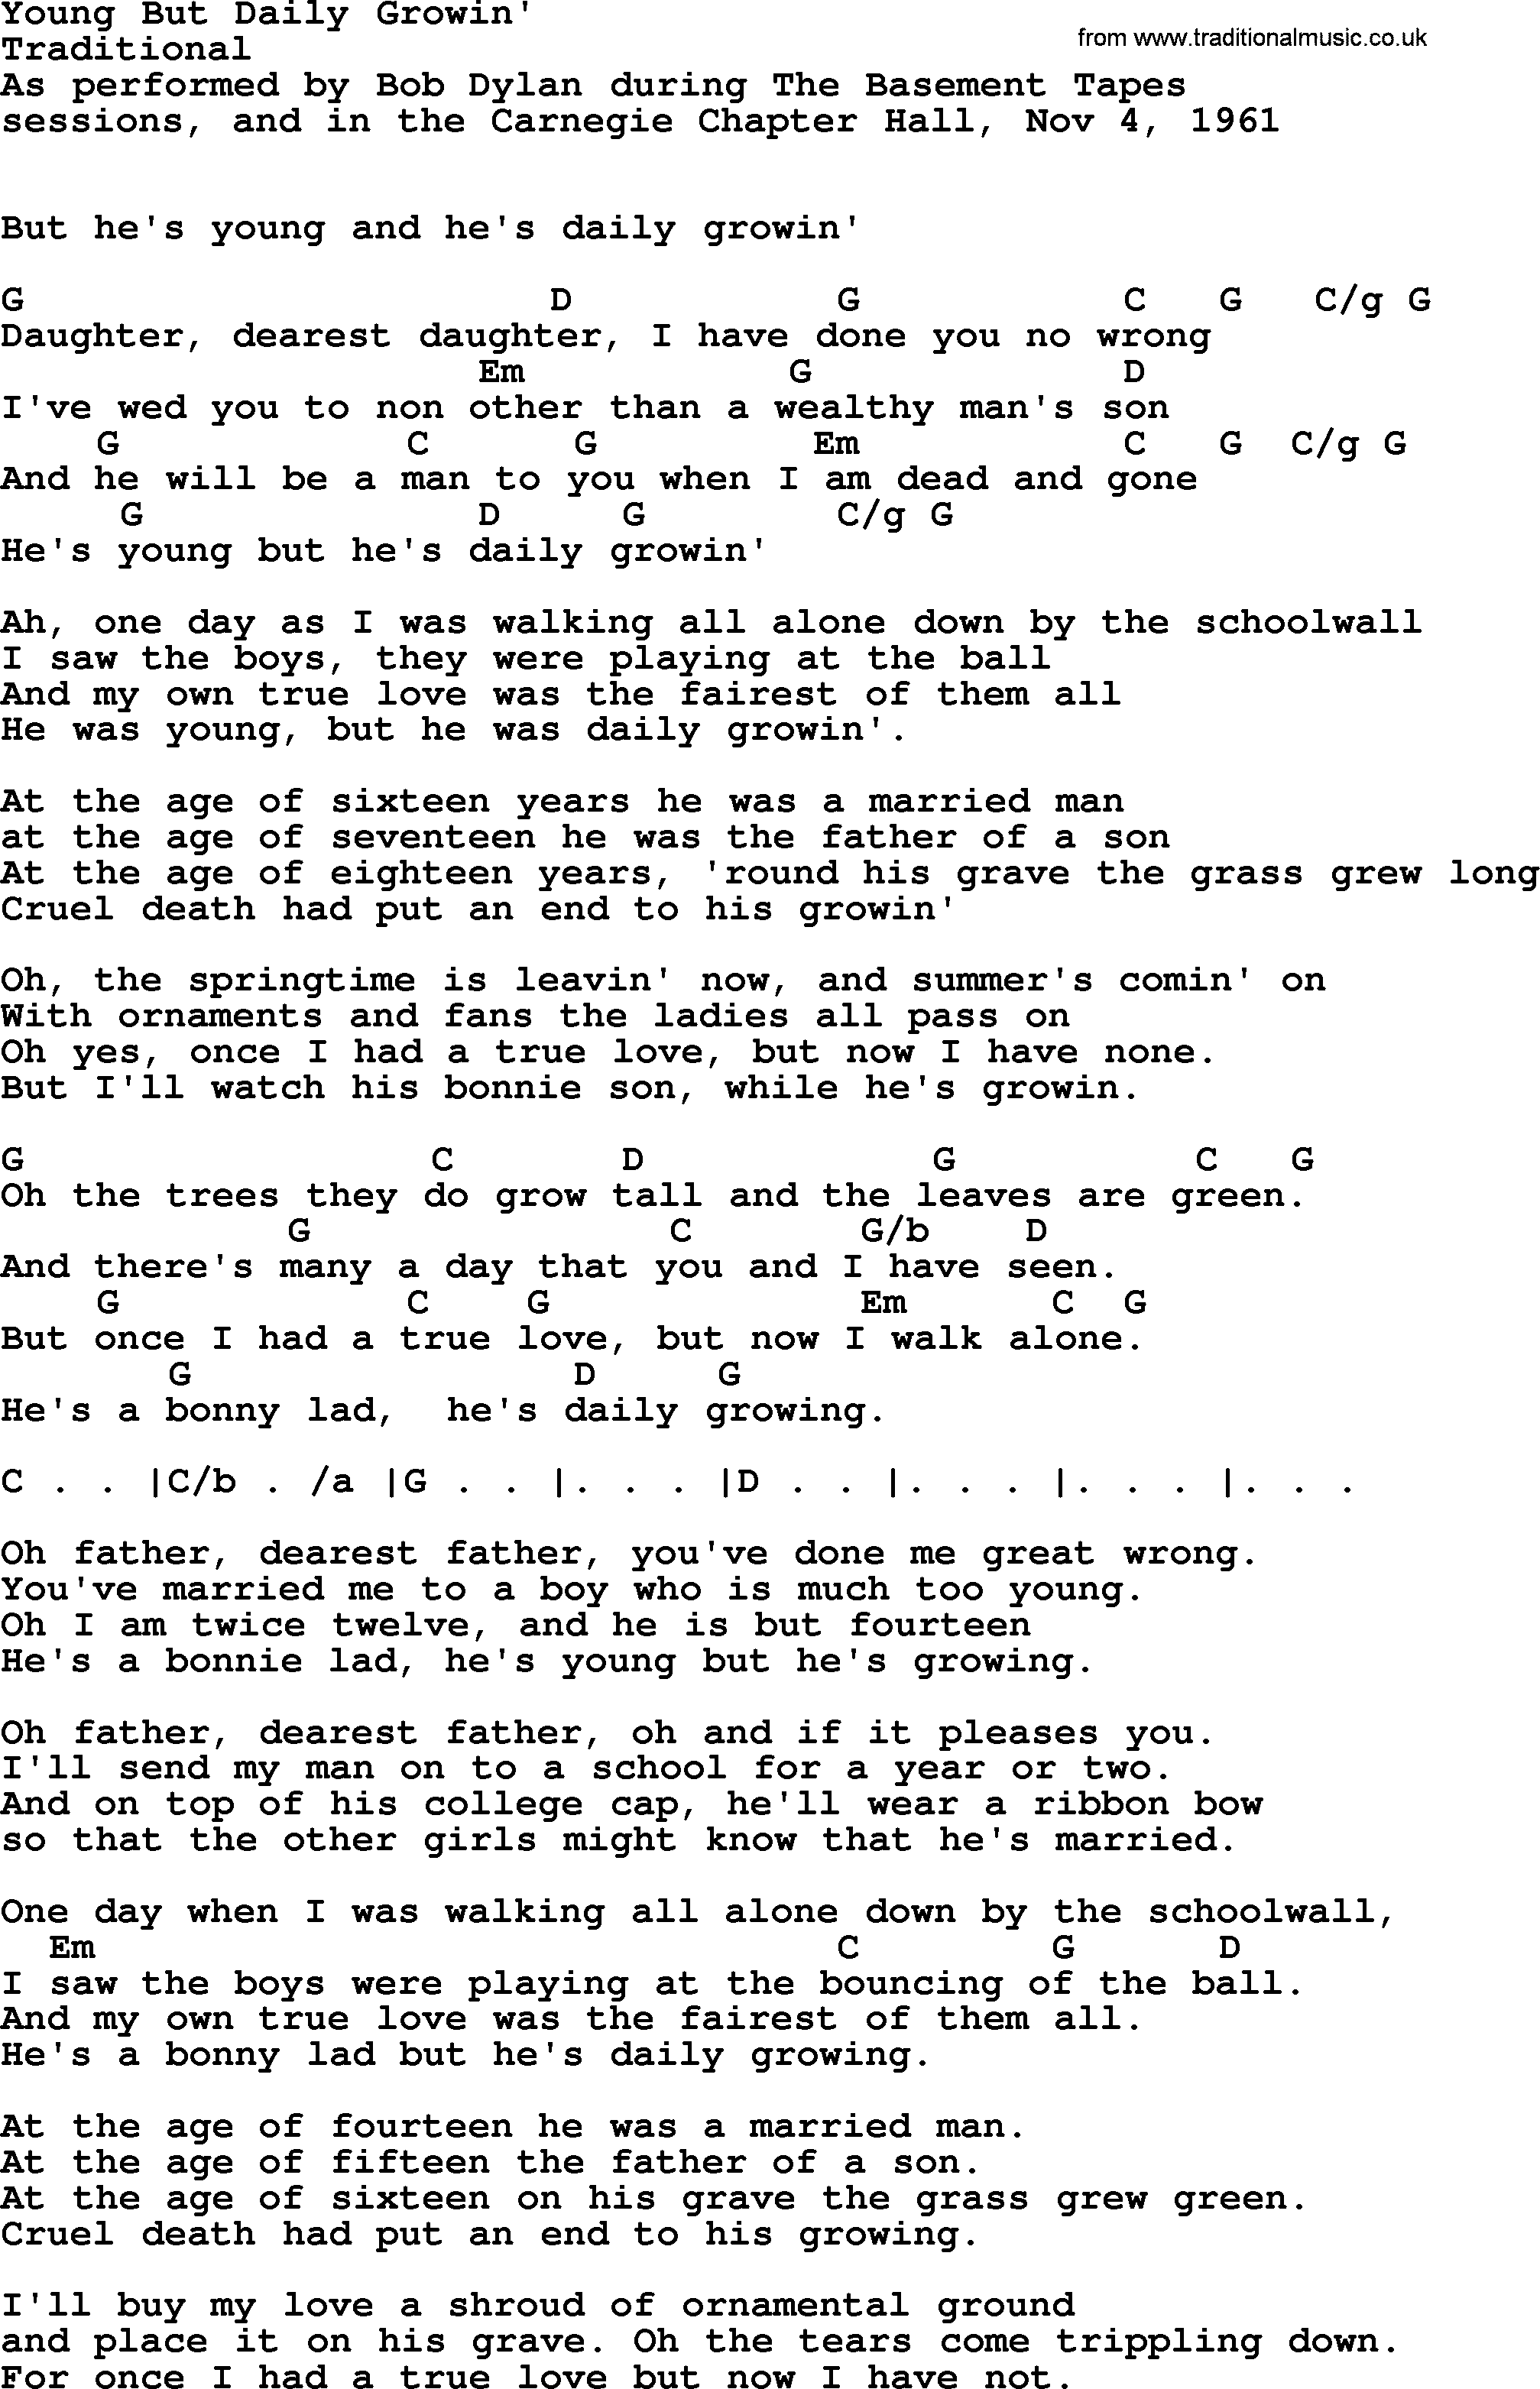 Bob Dylan song, lyrics with chords - Young But Daily Growin'